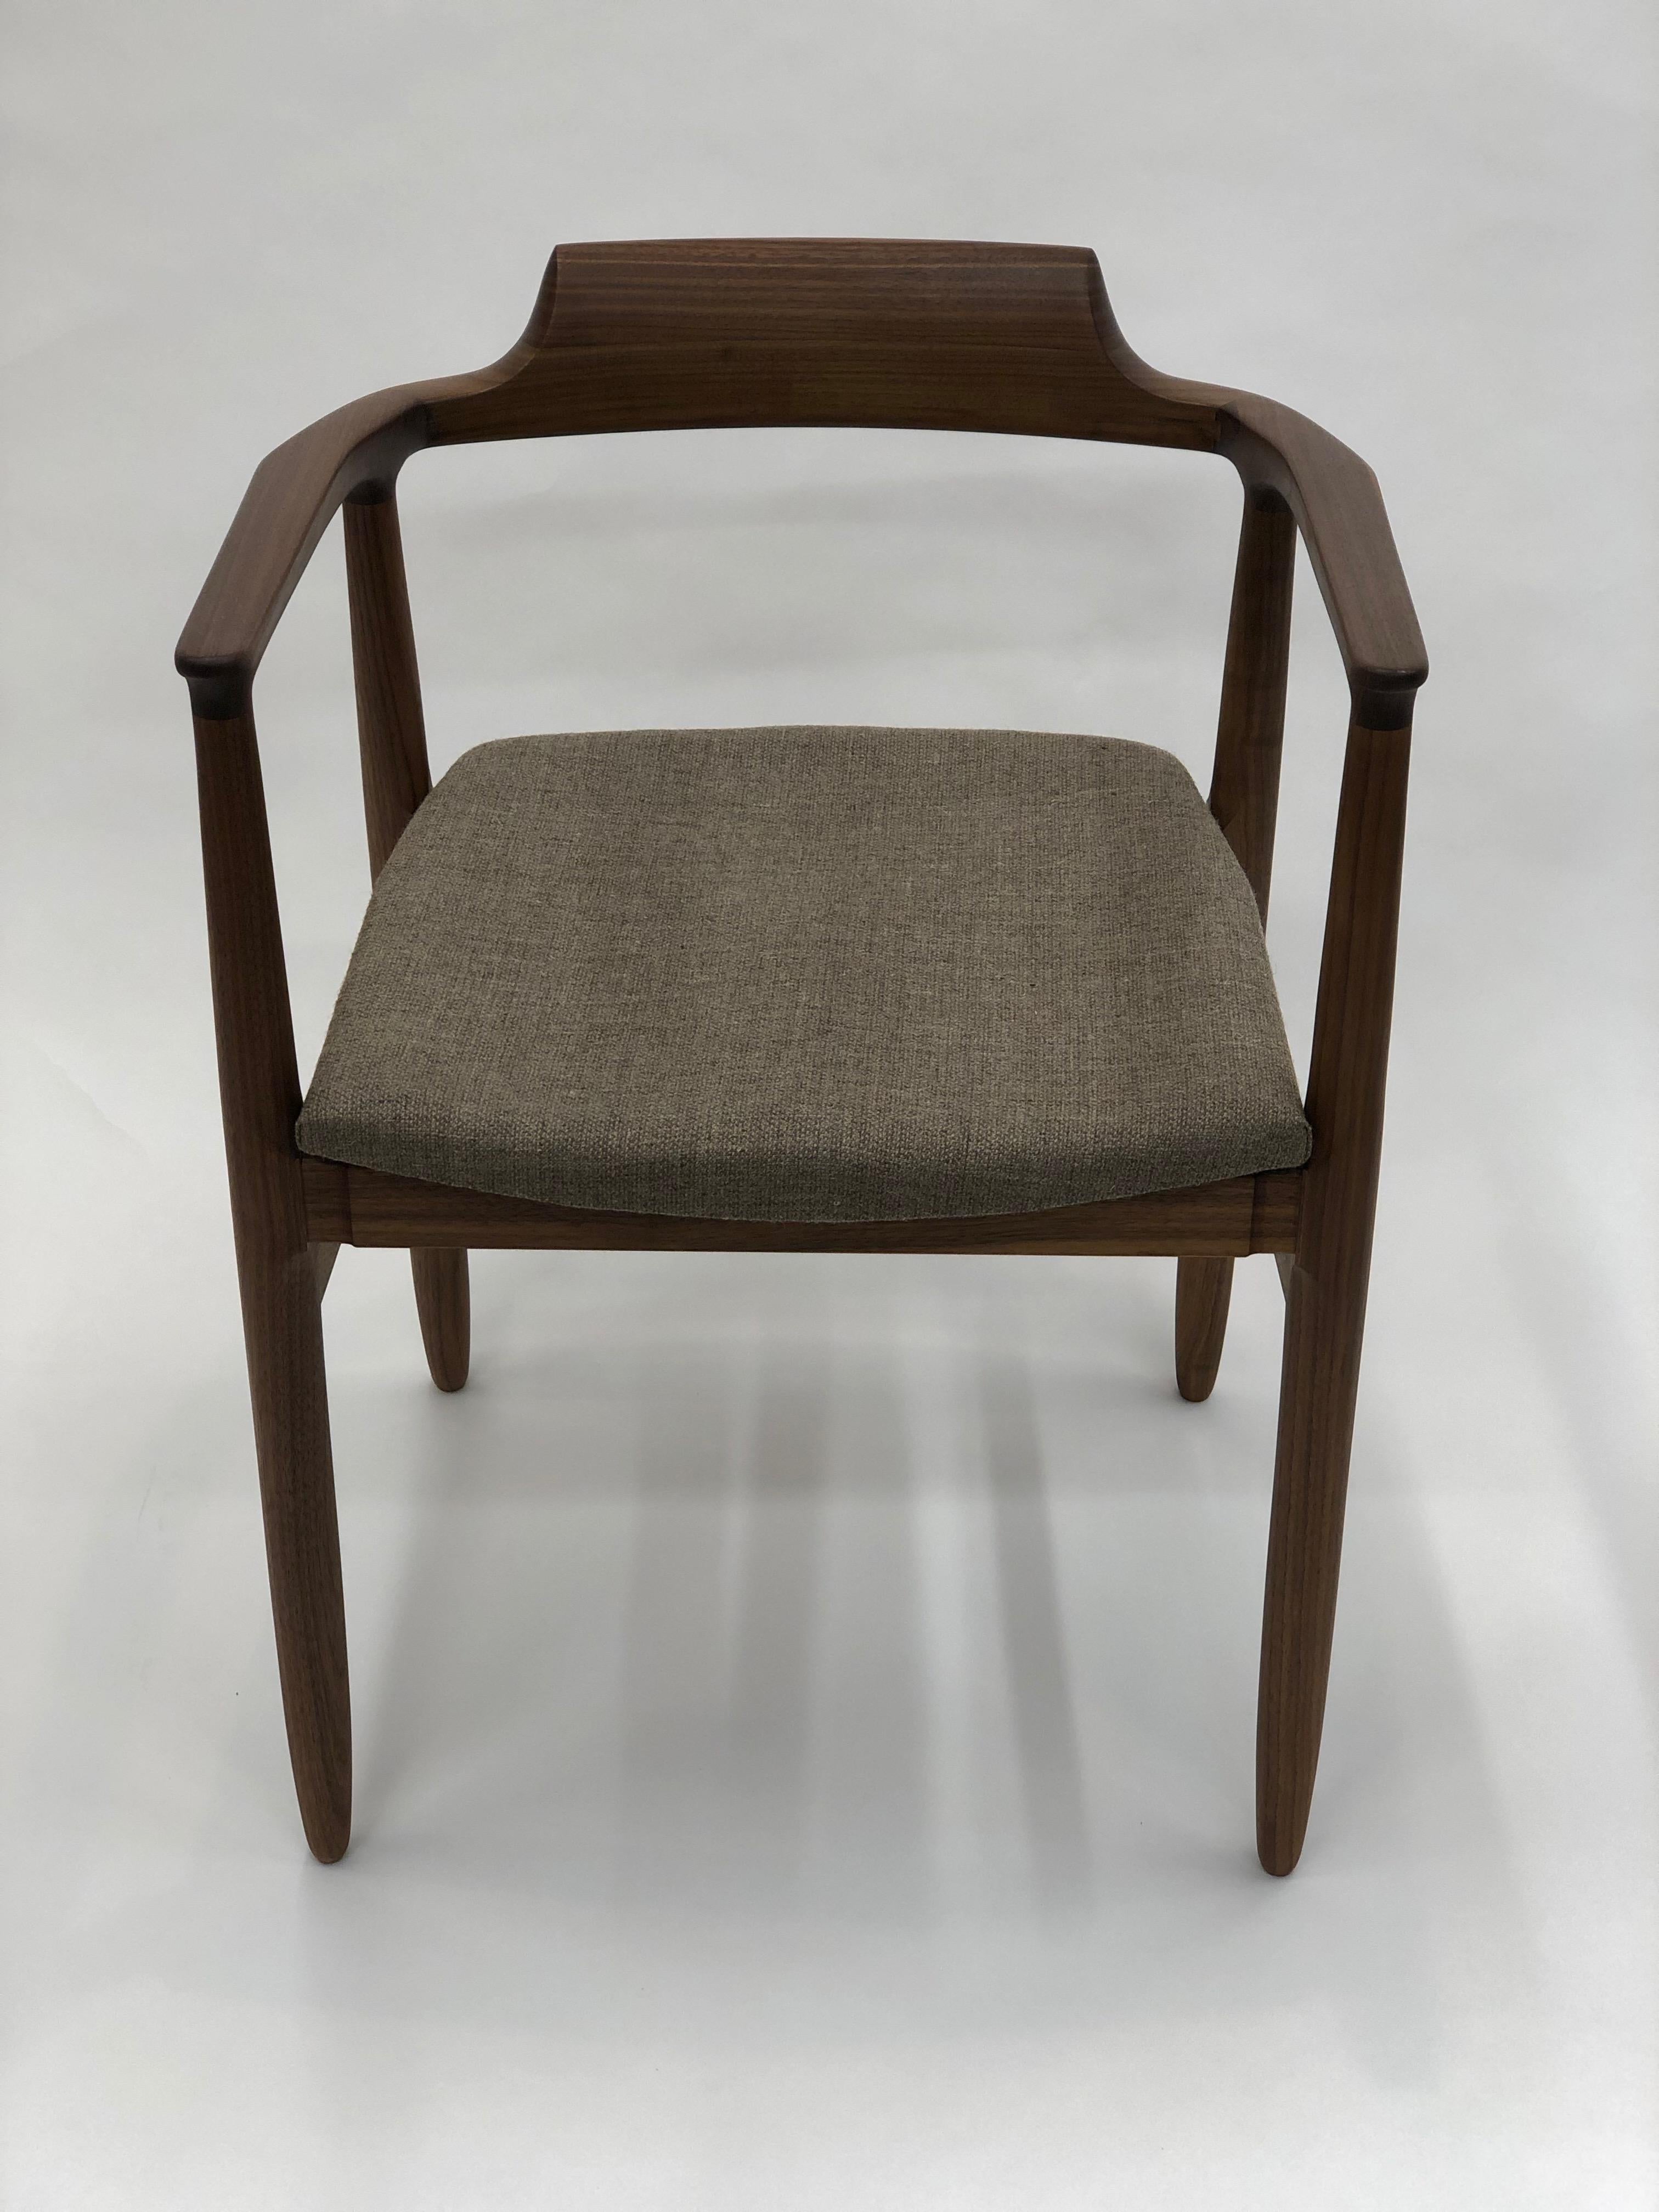 Henry the armchair is an original design by Brian Holcombe. Ergonomically designed around the human proportion this chair accommodates comfortable seating.

These chairs are individually handmade and can be purchased in a variety of materials by